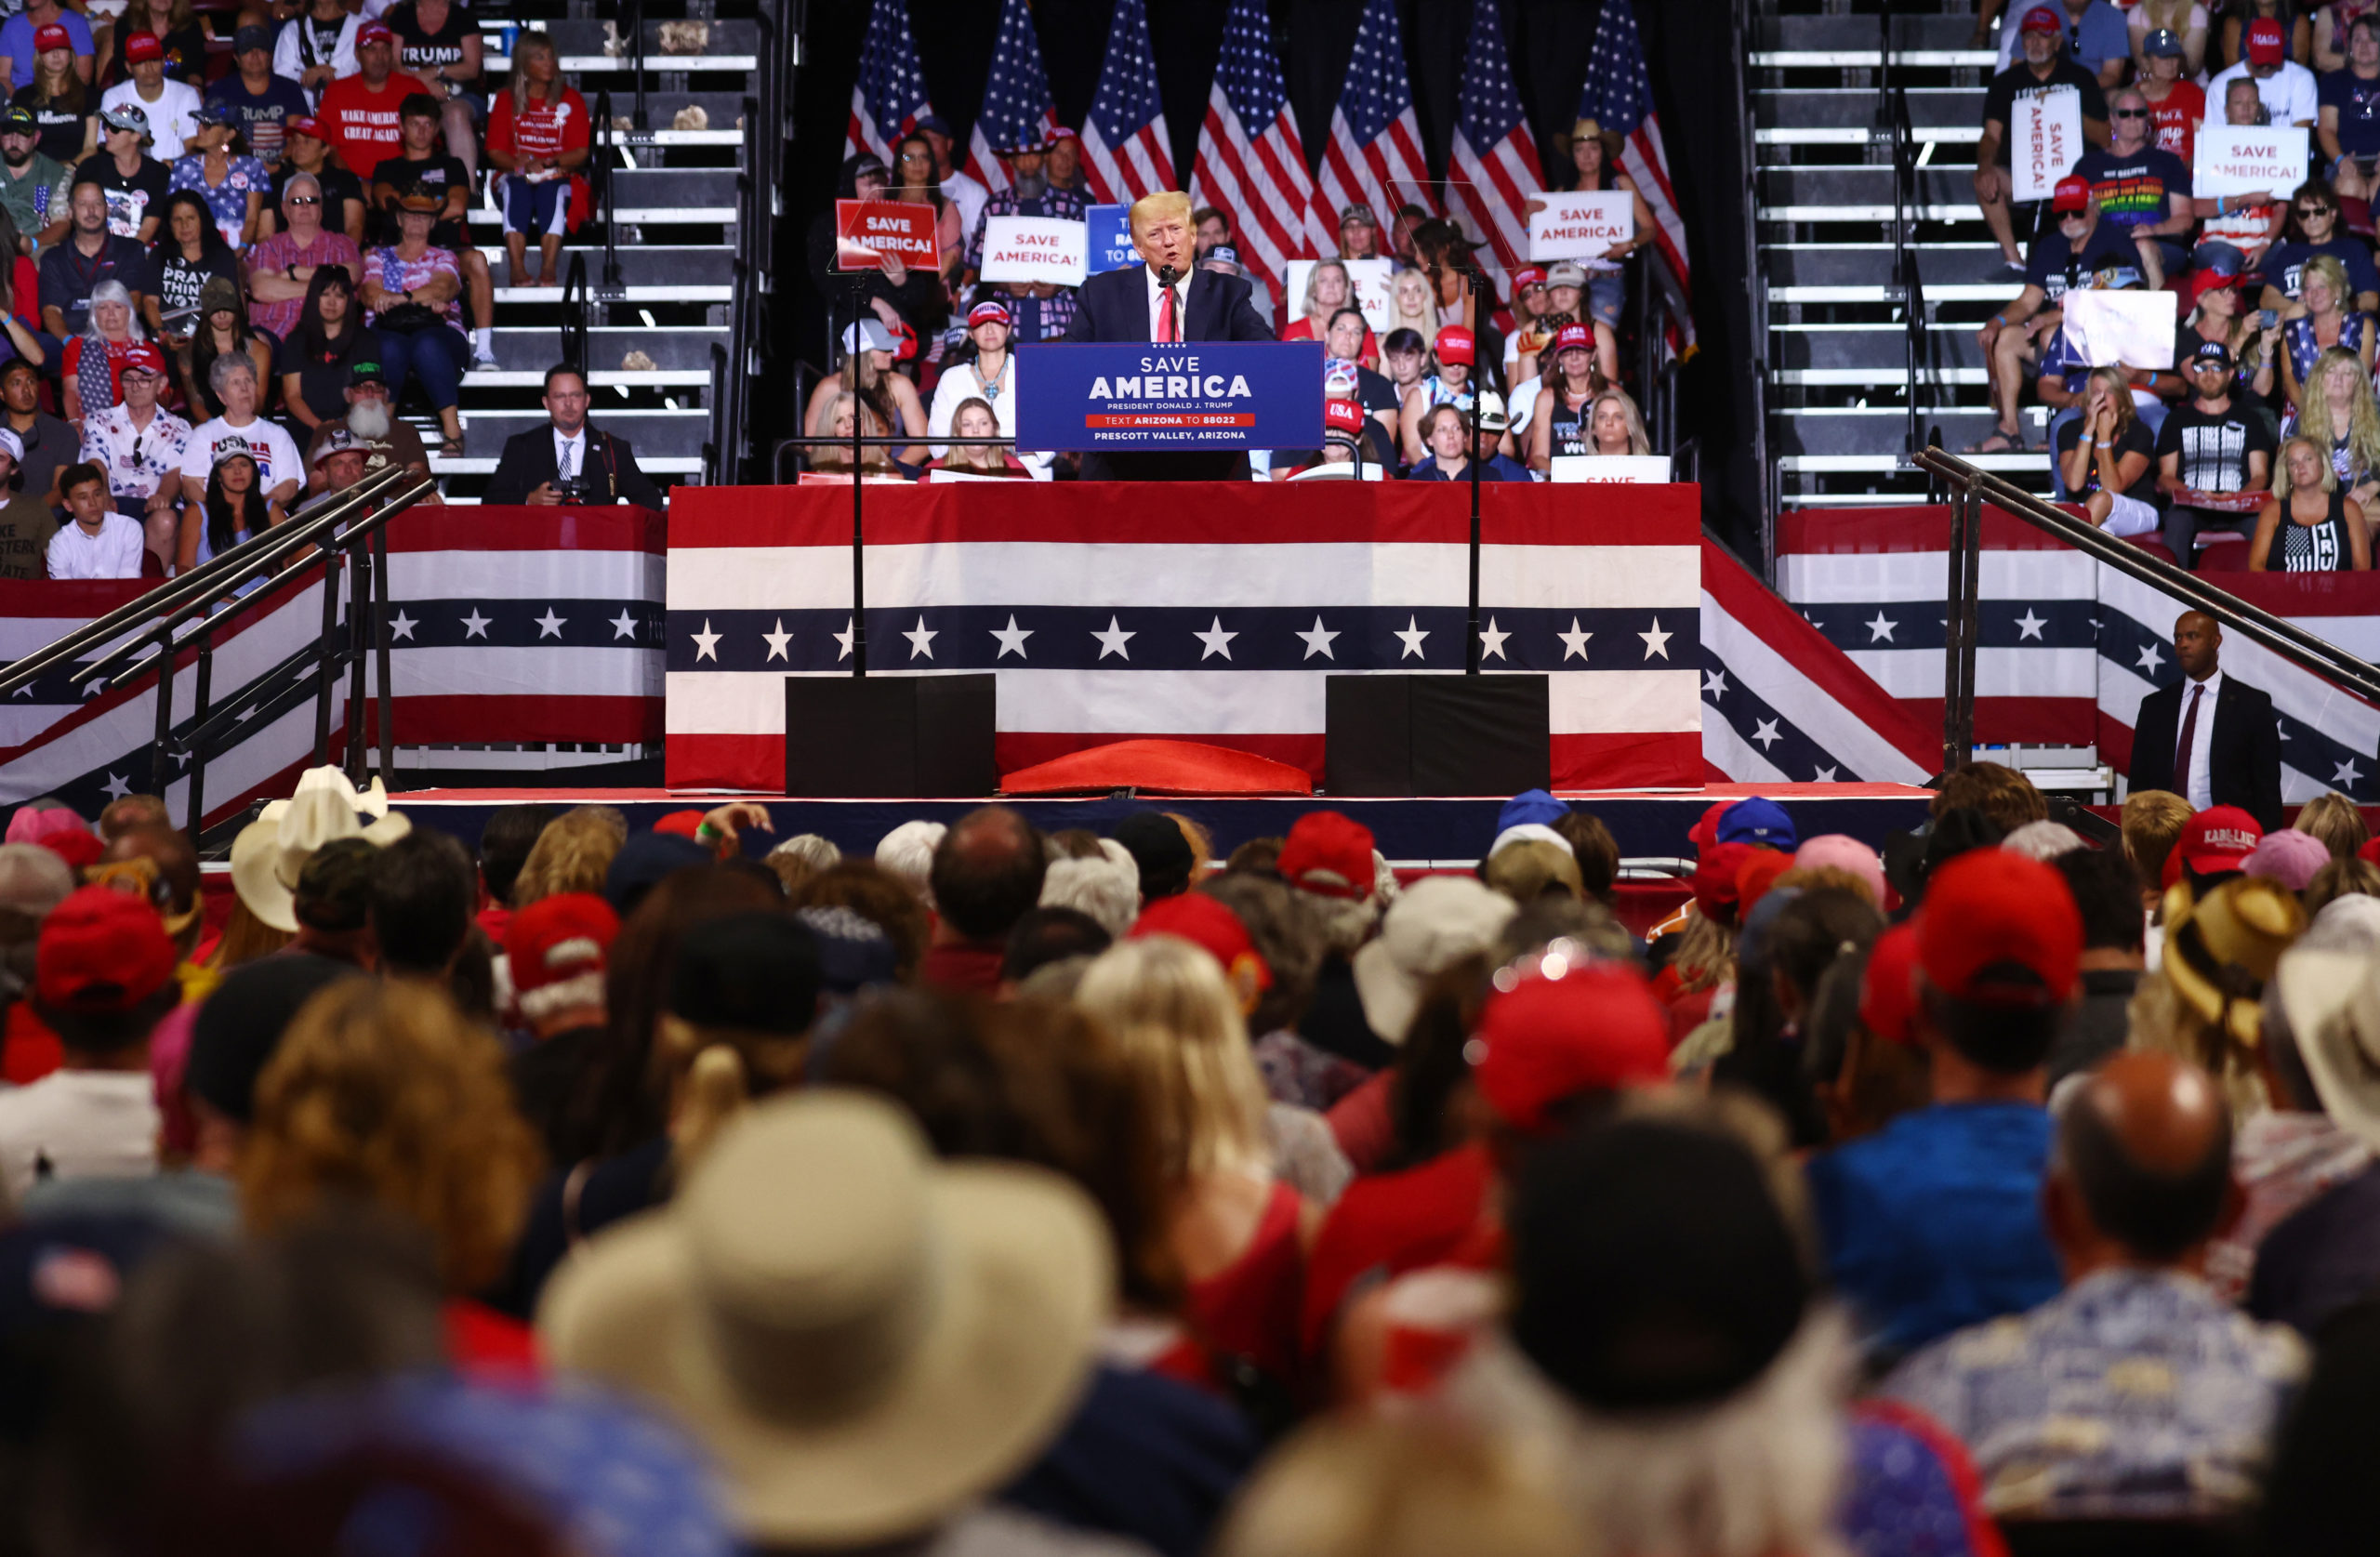 PRESCOTT VALLEY, ARIZONA - JULY 22: Former President Donald Trump (C) speaks to the crowd at a ‘Save America’ rally in support of Arizona GOP candidates on July 22, 2022 in Prescott Valley, Arizona. Arizona's primary election will take place August 2. (Photo by Mario Tama/Getty Images)